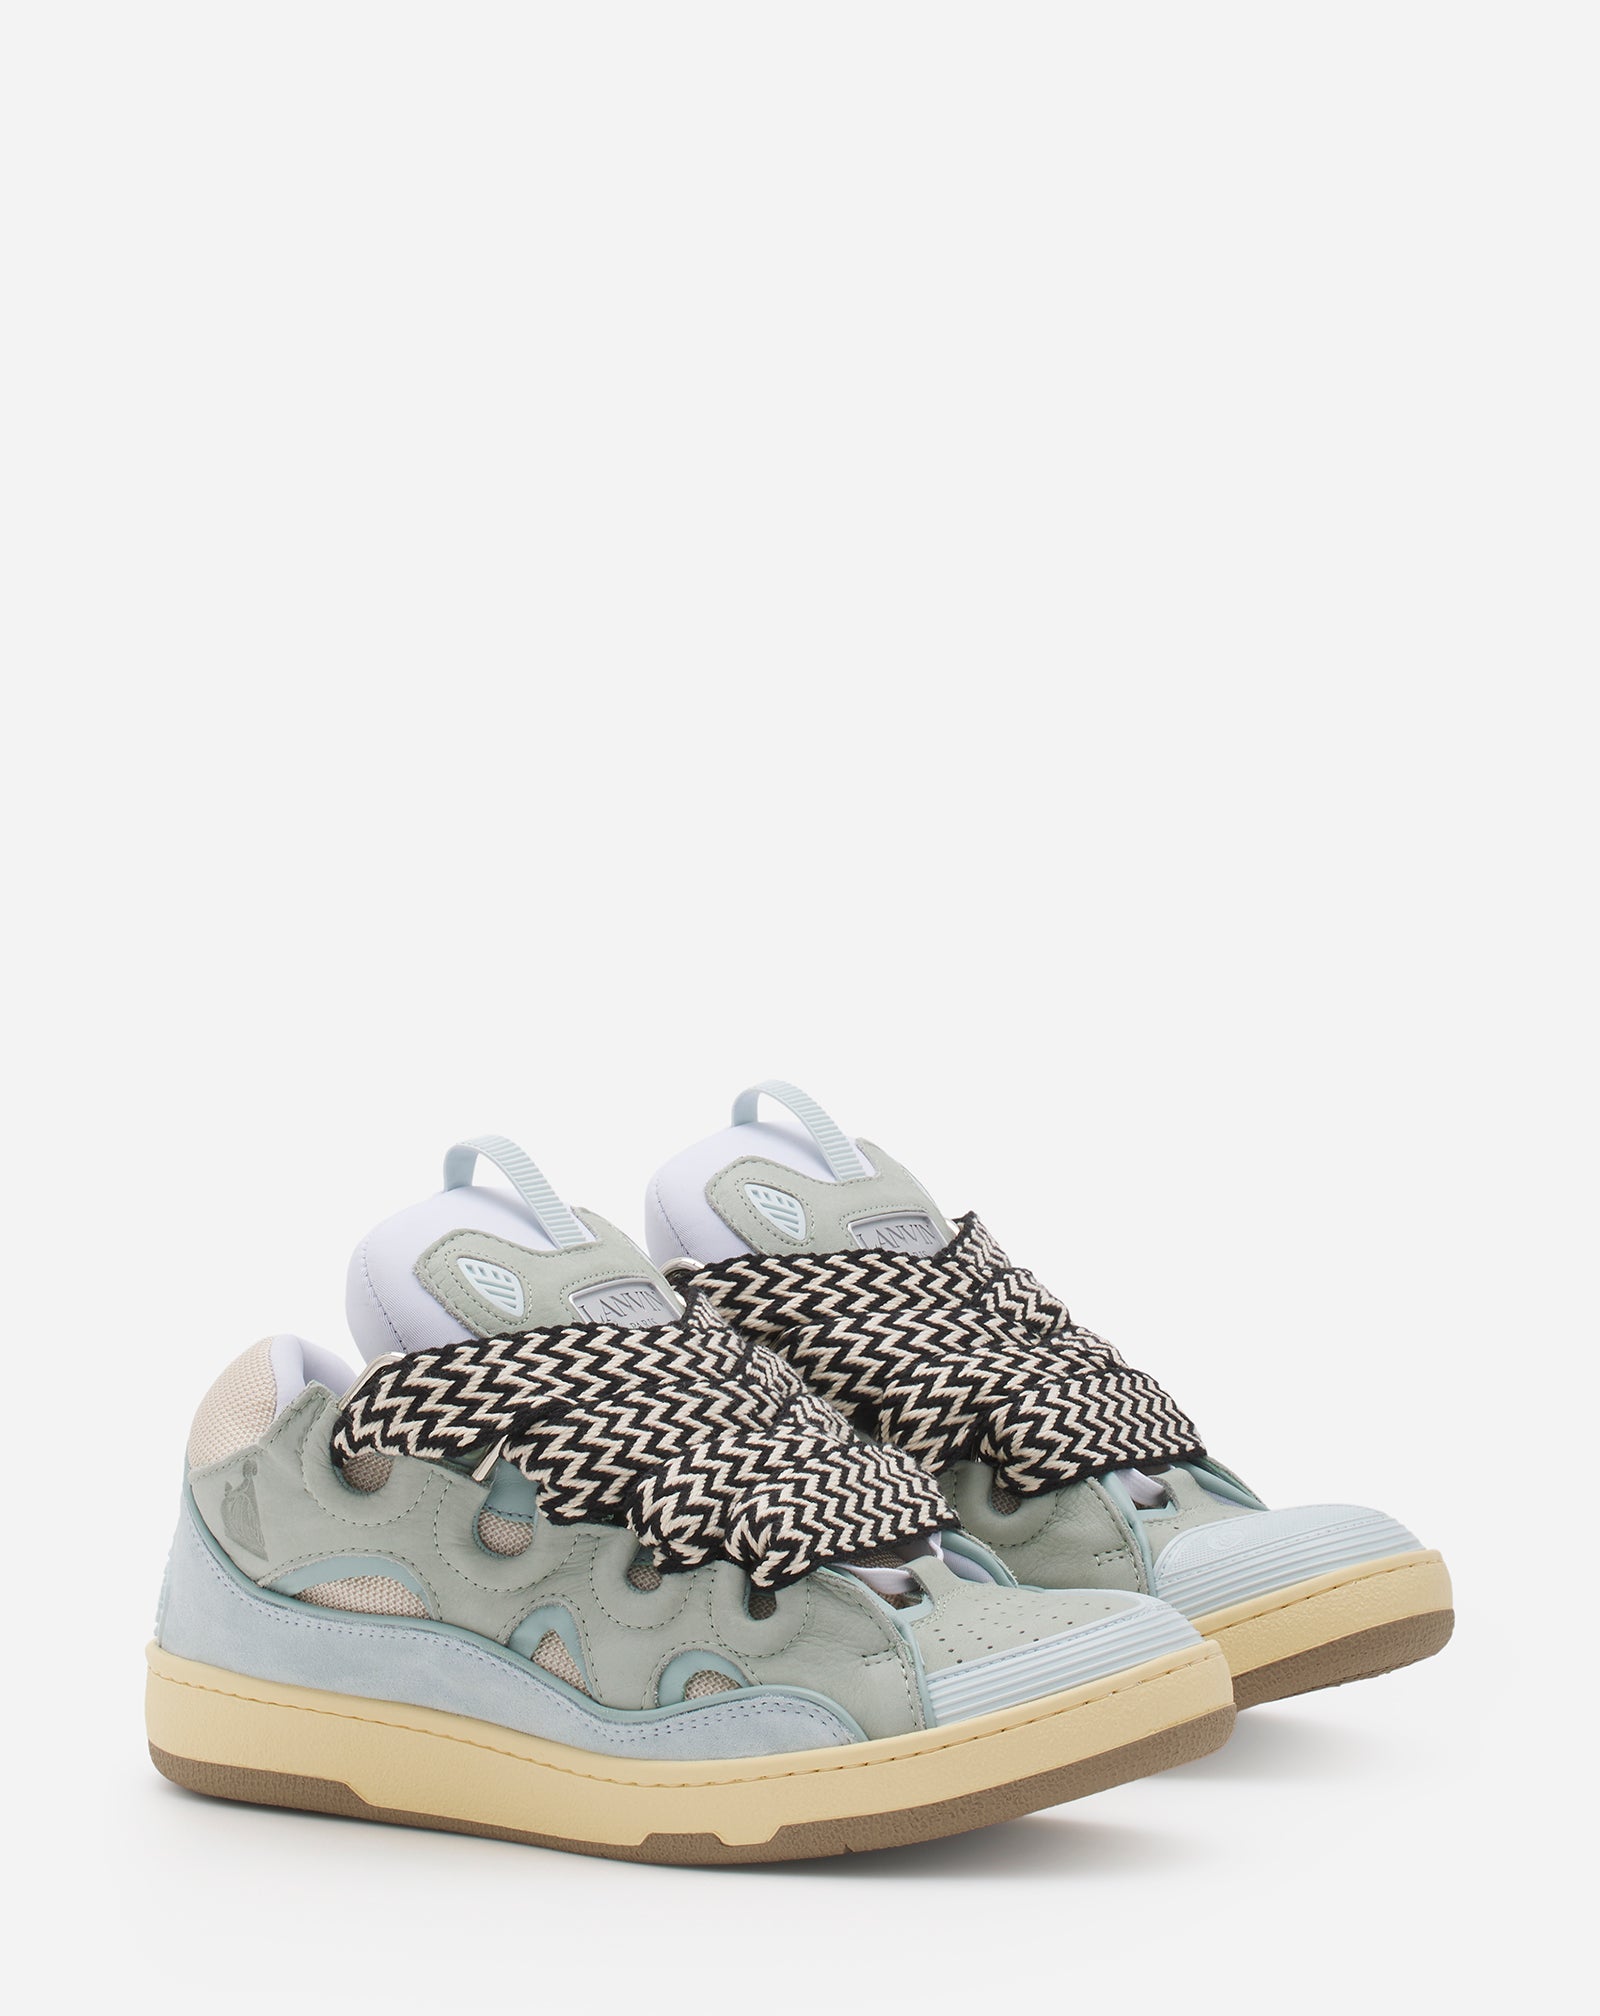 LEATHER CURB SNEAKERS LIGHT BLUE – LANVIN